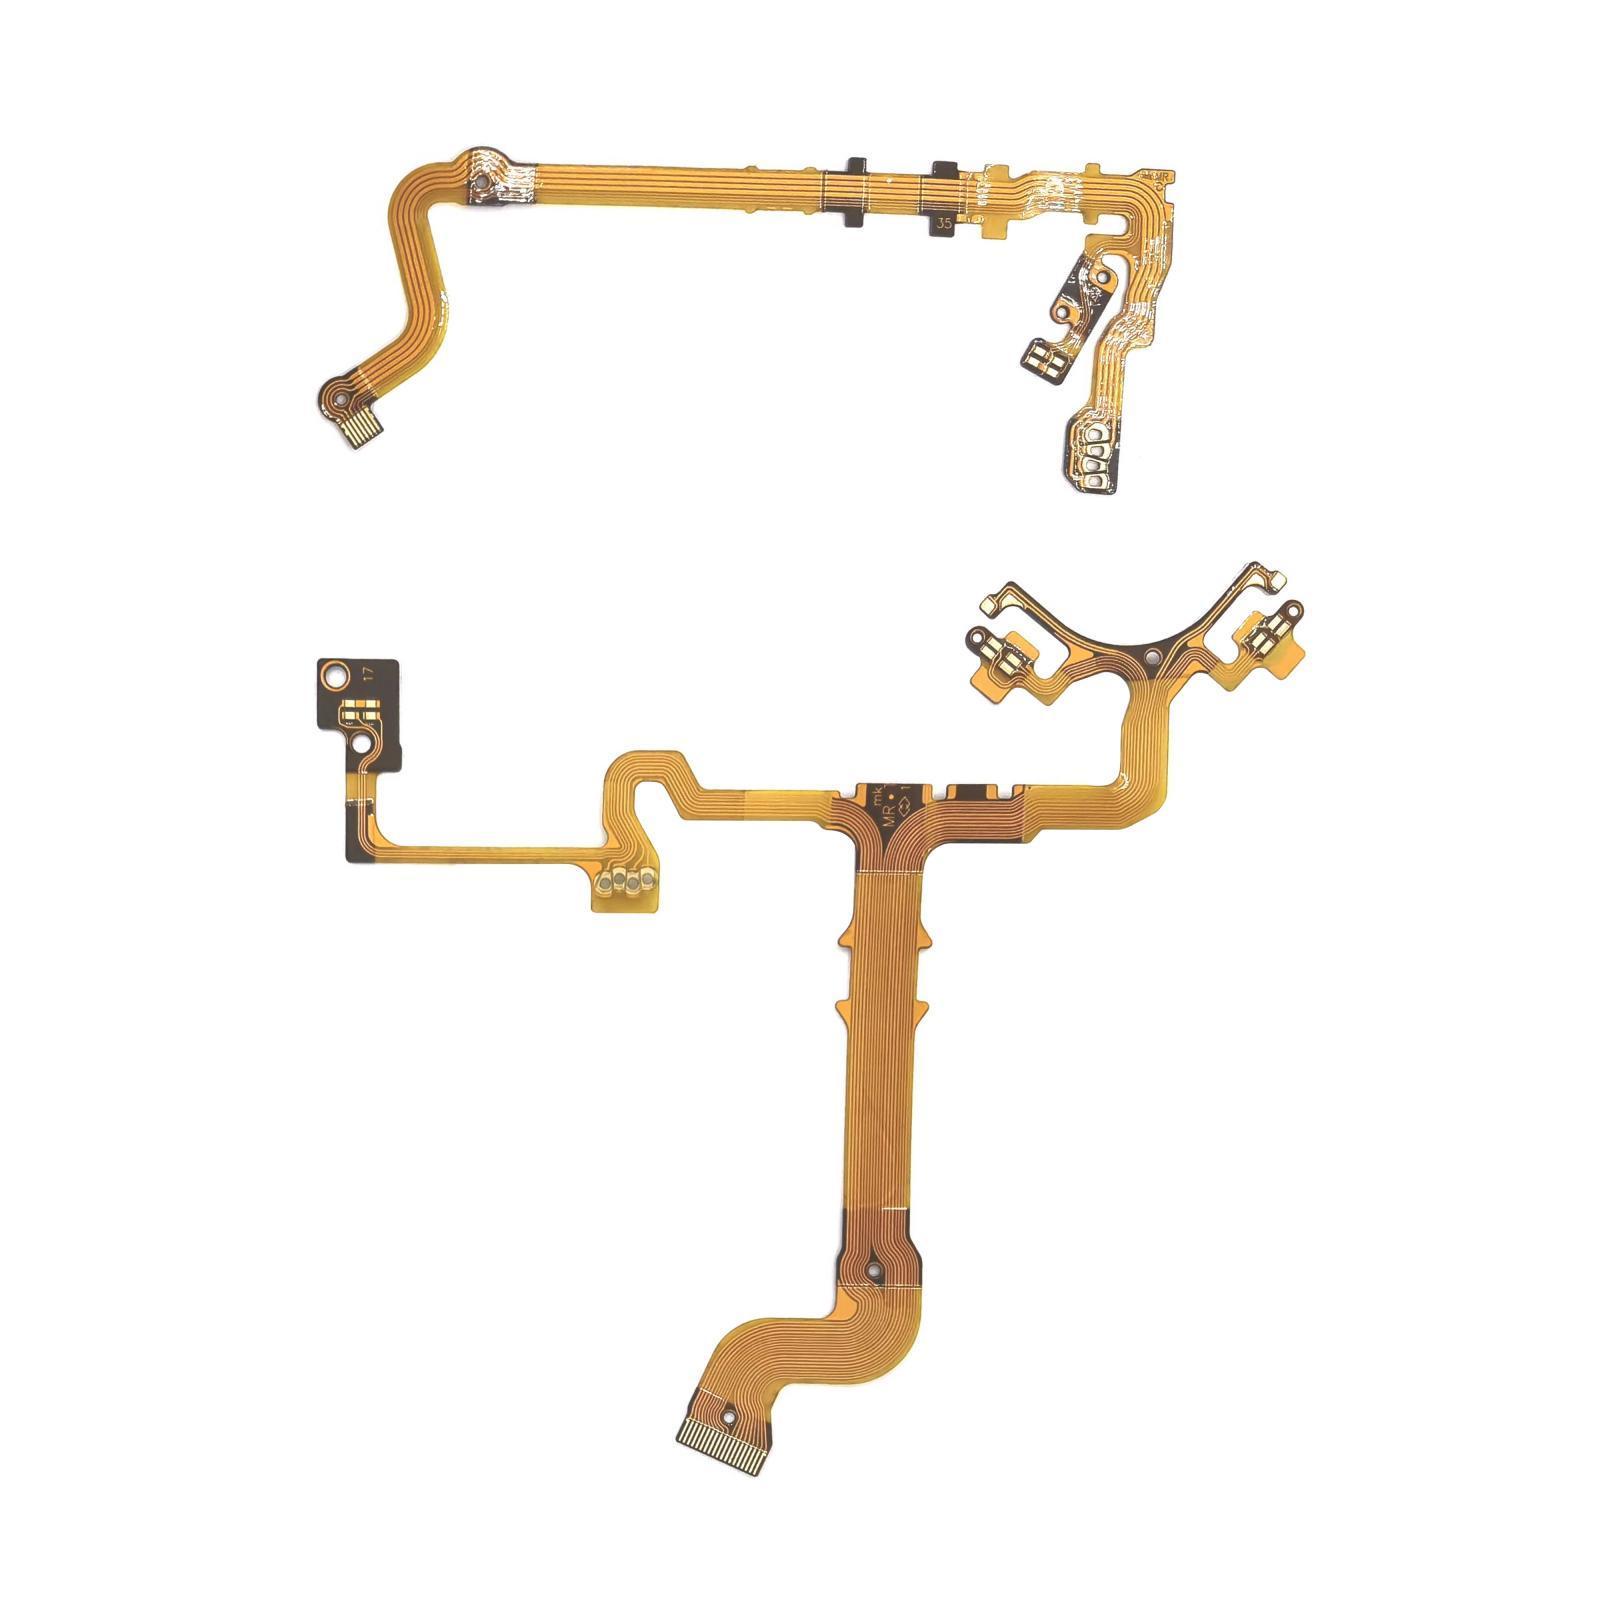 2x Lens Focus Anti Cable Shockproof Flex Cable for 15-45 mm